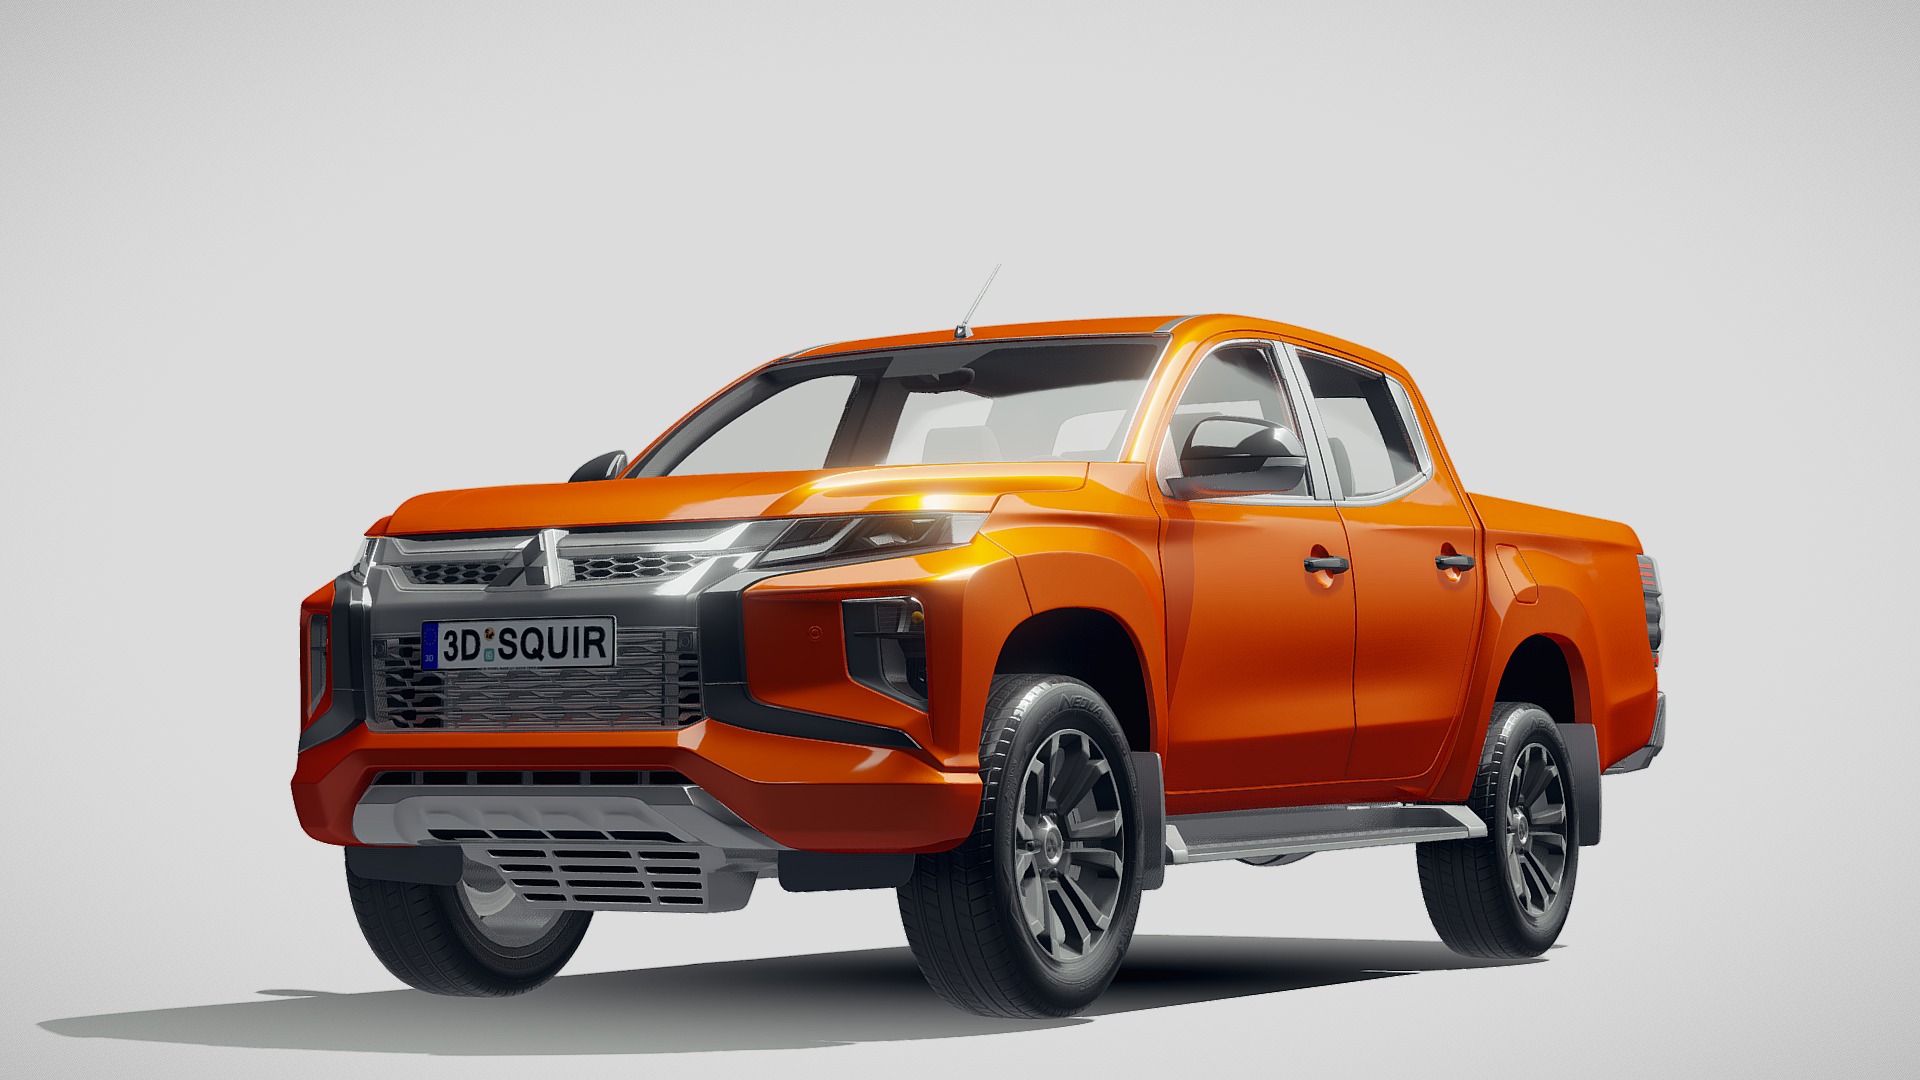 3D model Mitsubishi L200 crew cab 2019 - This is a 3D model of the Mitsubishi L200 crew cab 2019. The 3D model is about an orange car with a white background.